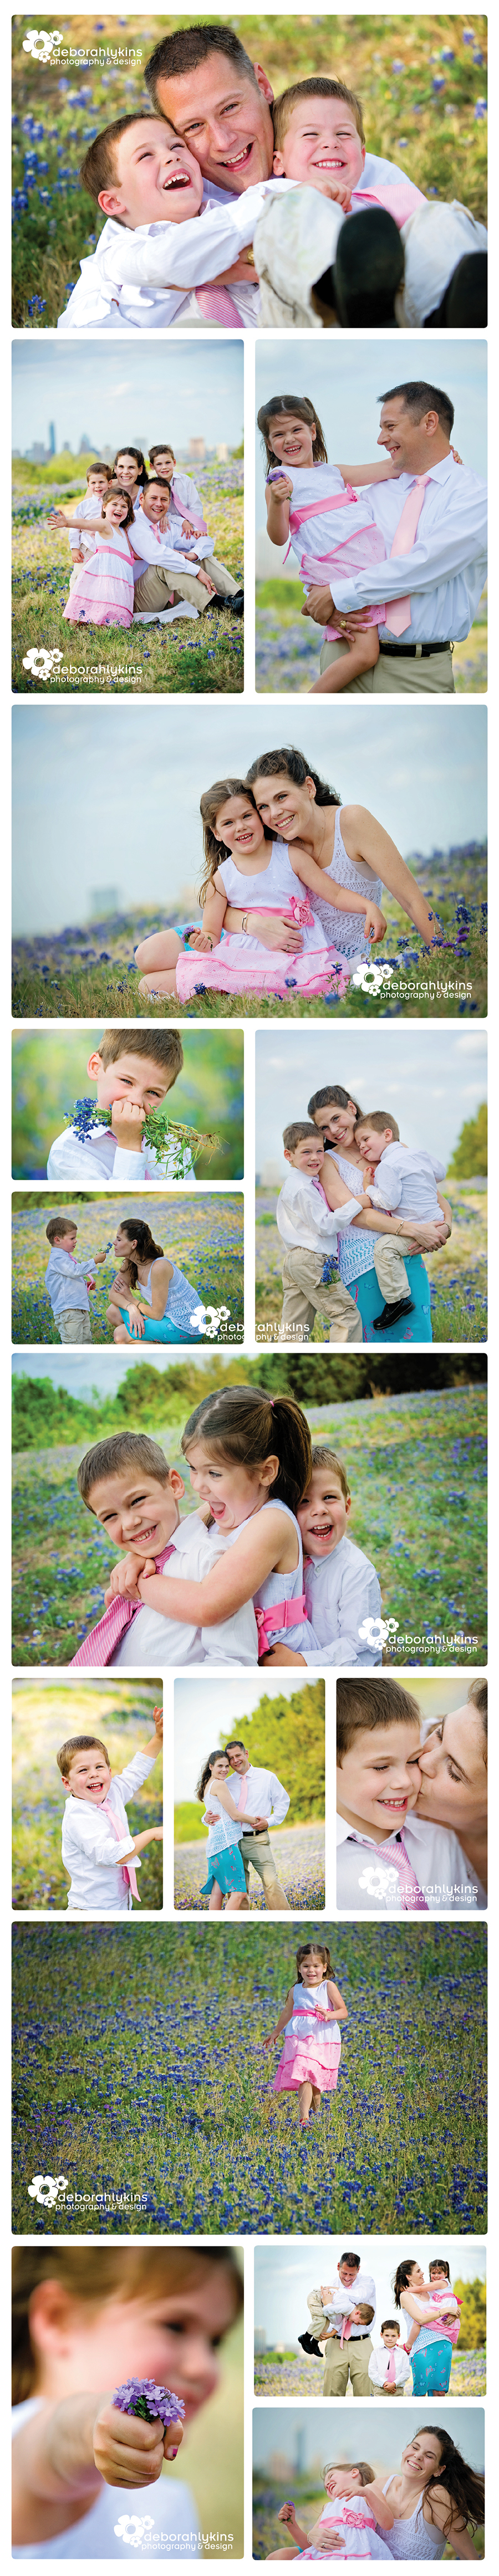 Fun ad colorful family photos in a field of bluebonnets in Austin, Texas.